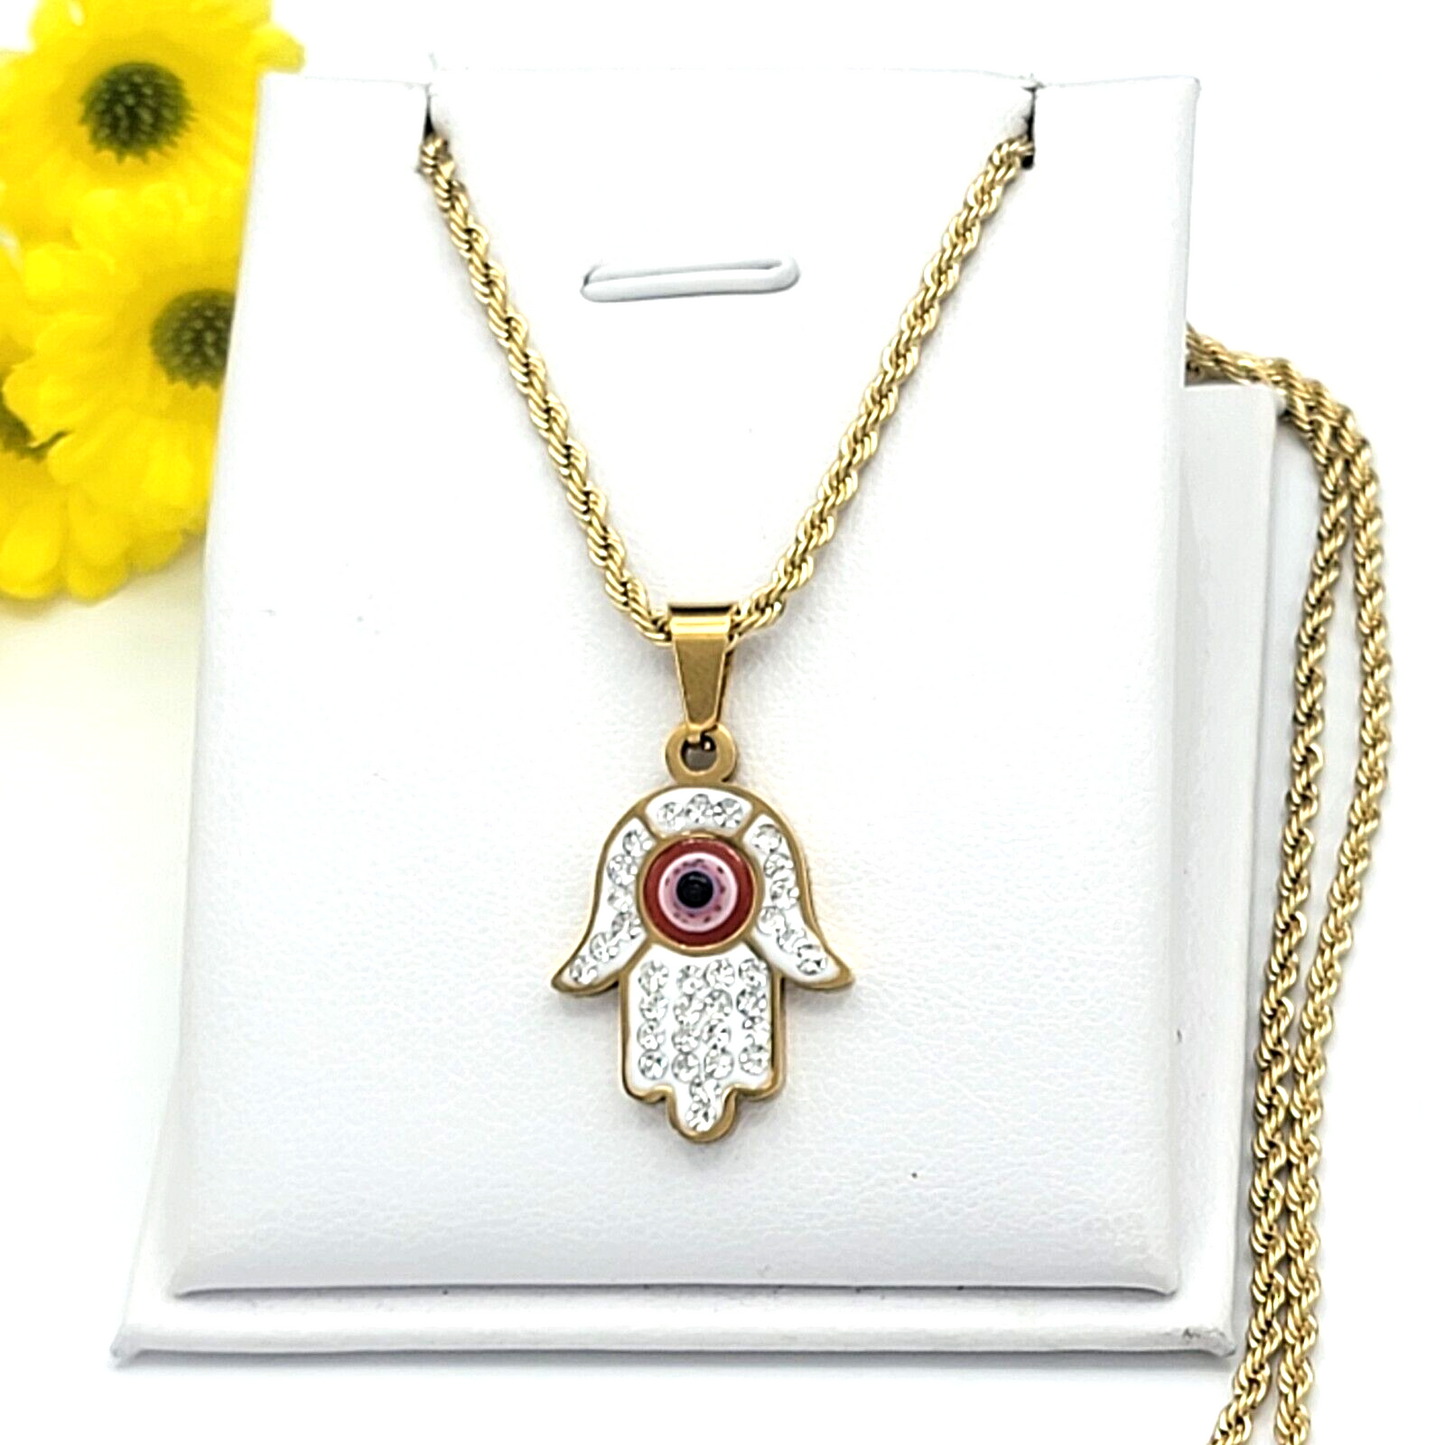 Necklaces - Stainless Steel Gold Plated. Hamsa Fatima Hand Pendant & Chain.